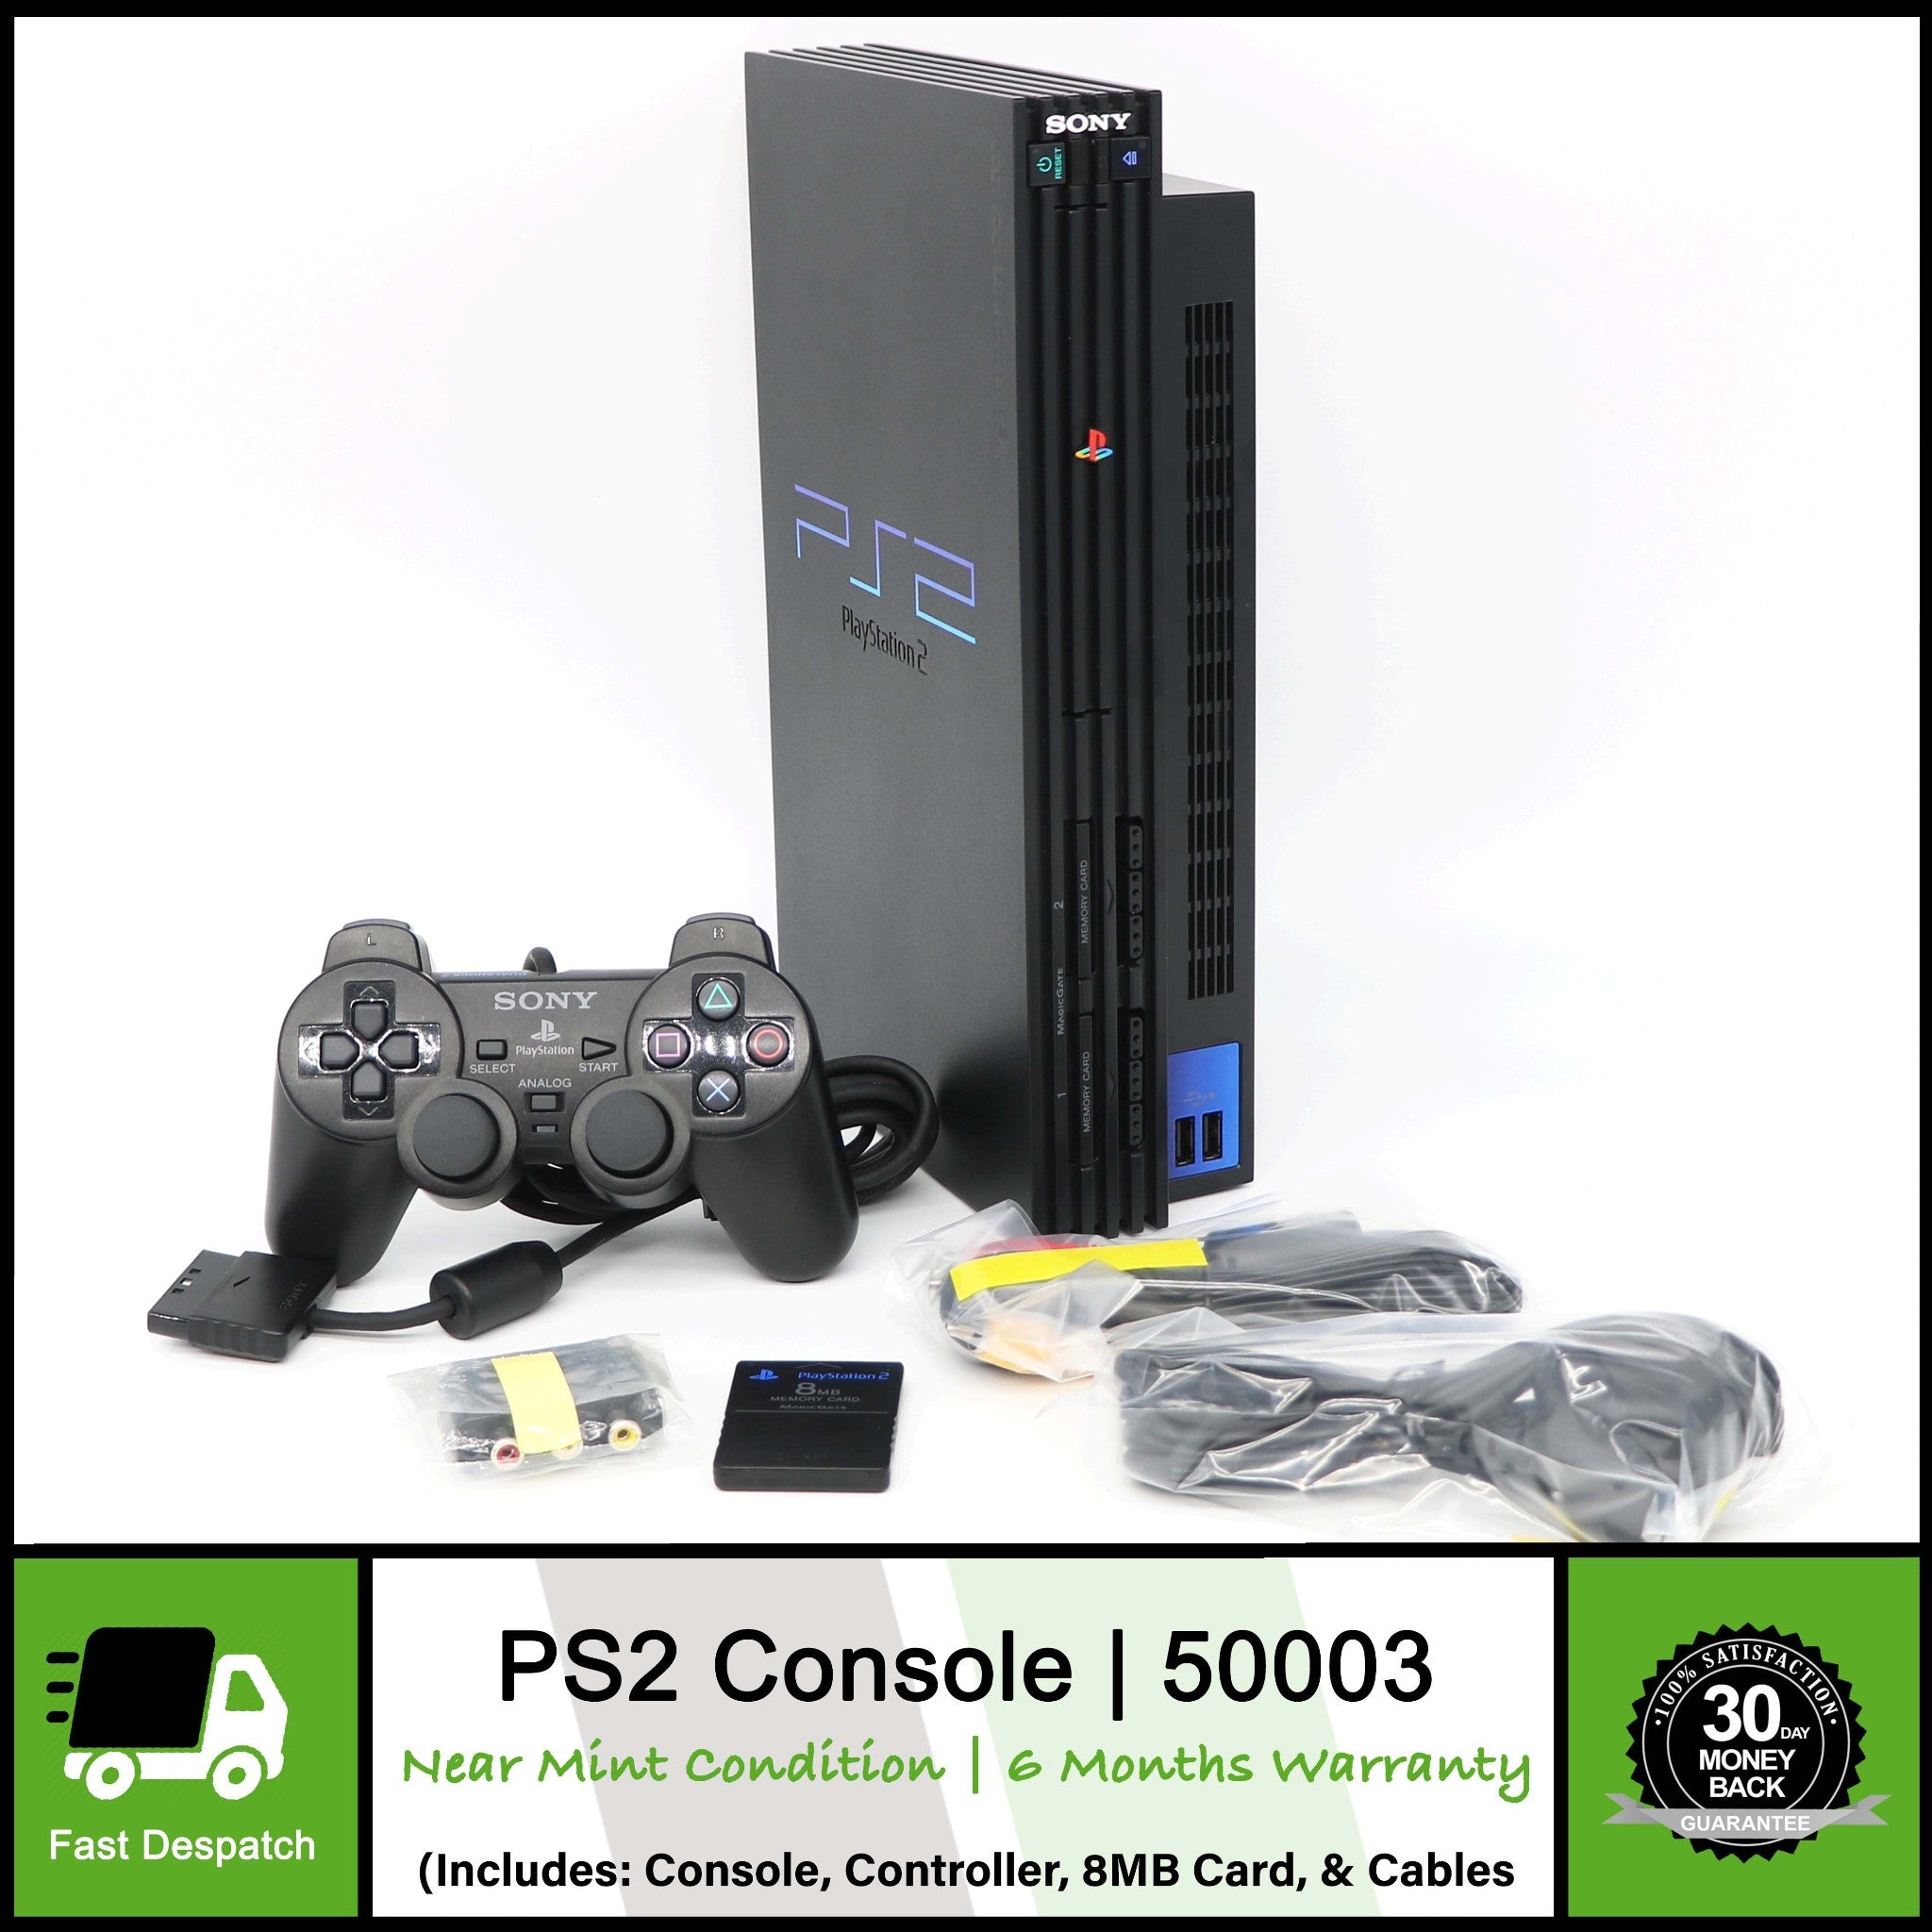 Charcoal Black Fat Sony PS2 Console System | SCPH-50003 | Near Mint Condition